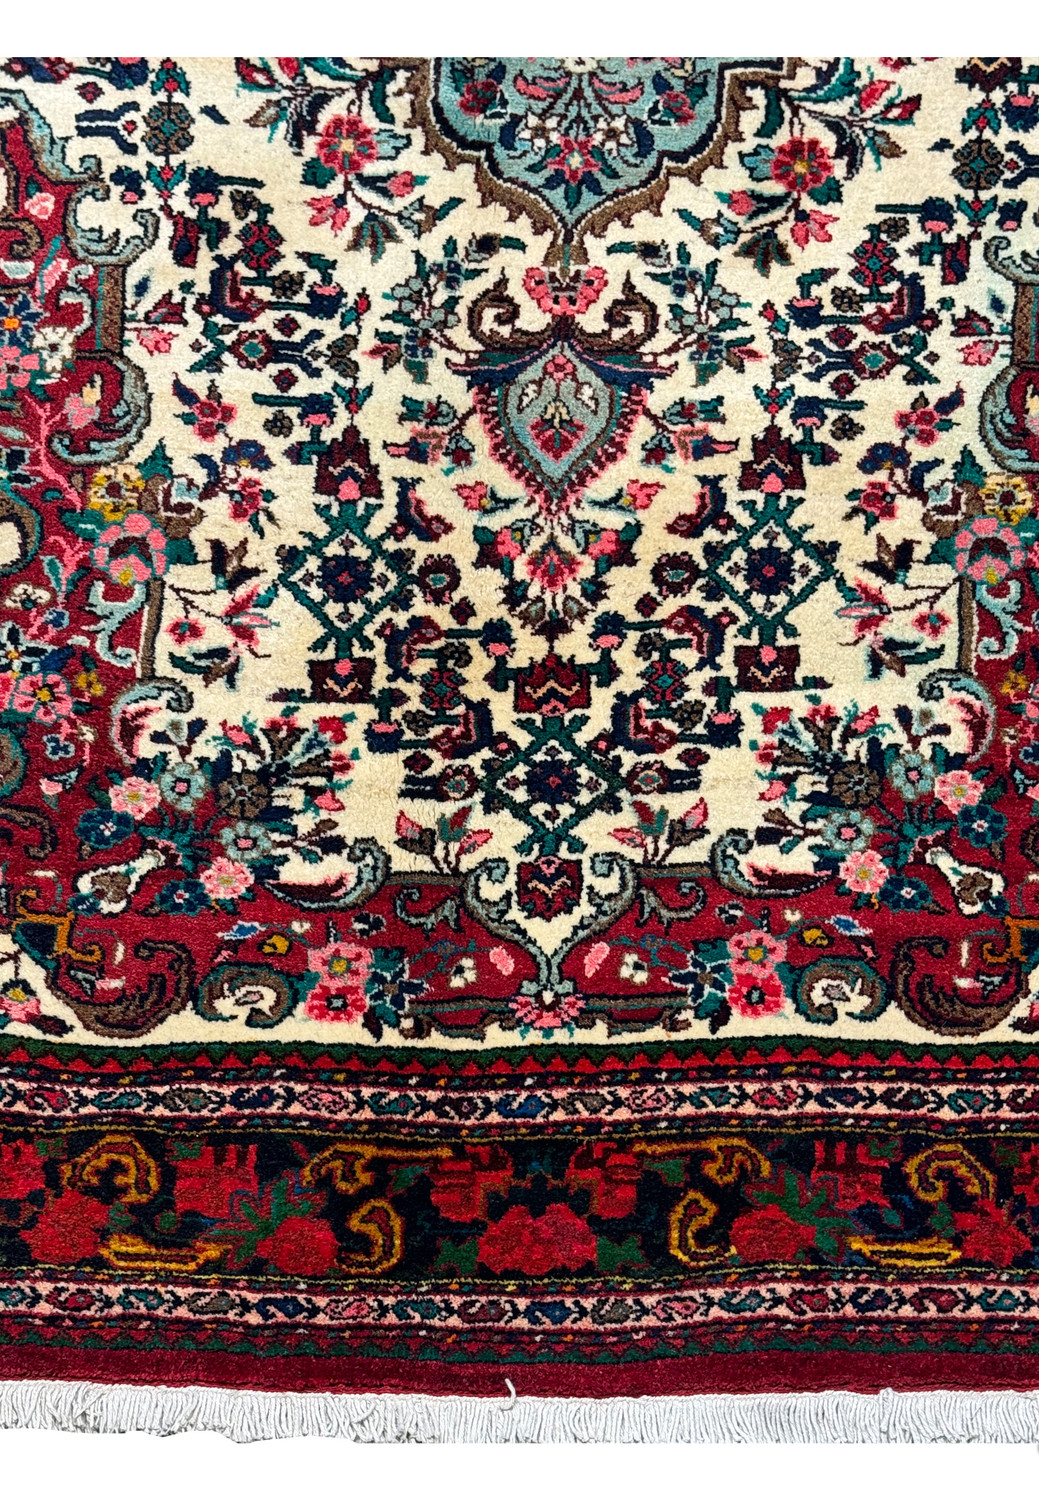 Detailed view of the central medallion and floral designs on a vintage 4'5" x 7 Persian Bijar rug